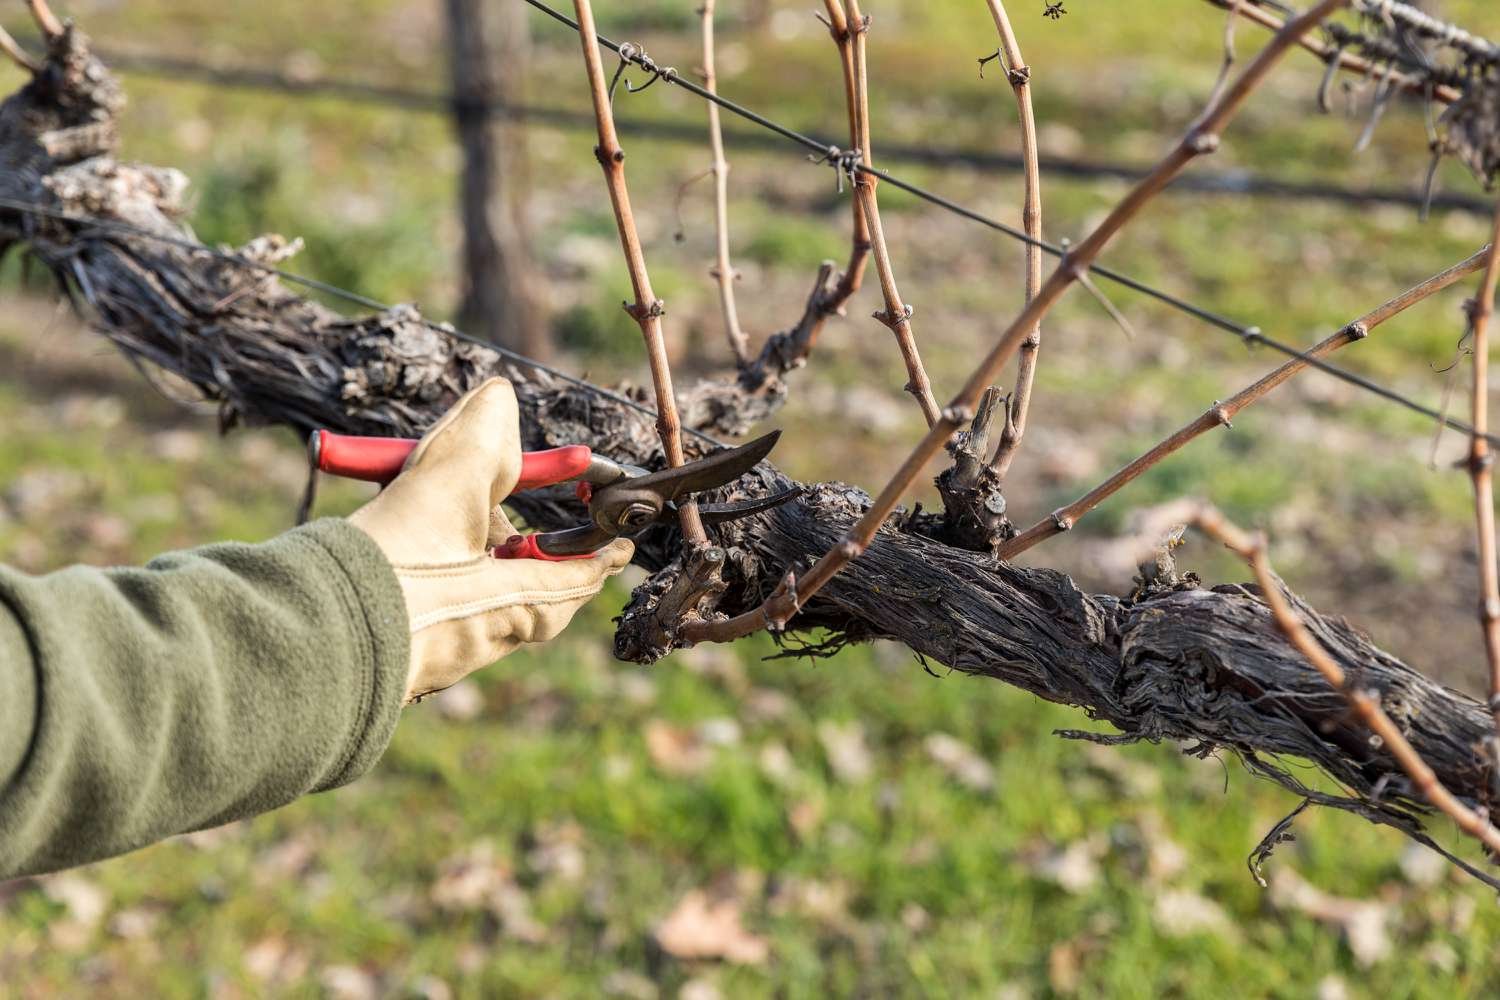 this image shows Grapevine Pruning